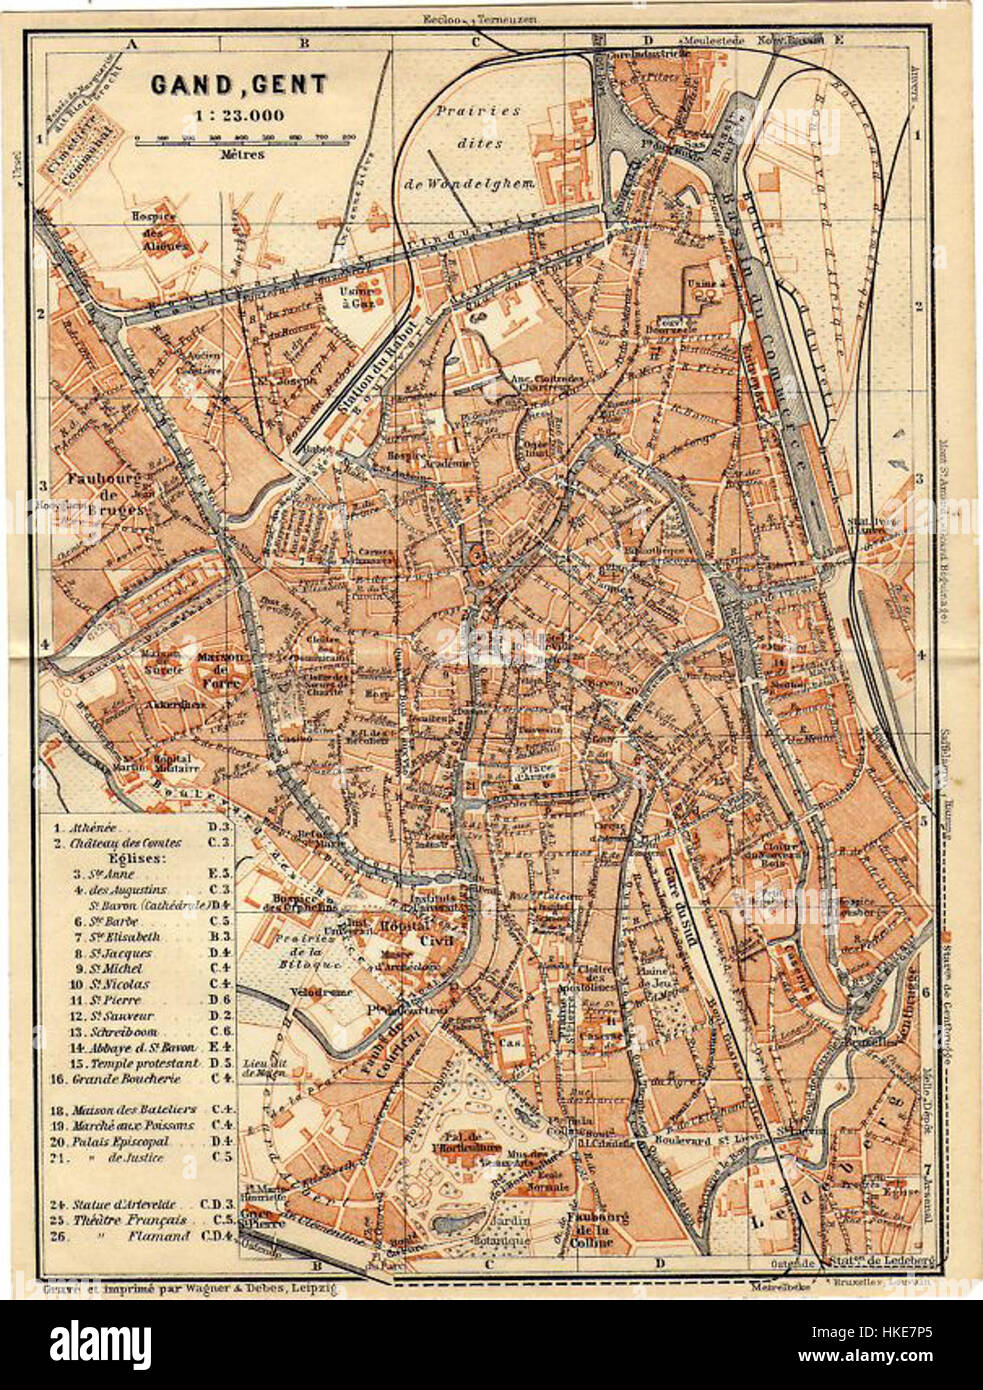 Map of Ghent by Wagner and Debes, 1914 Stock Photo